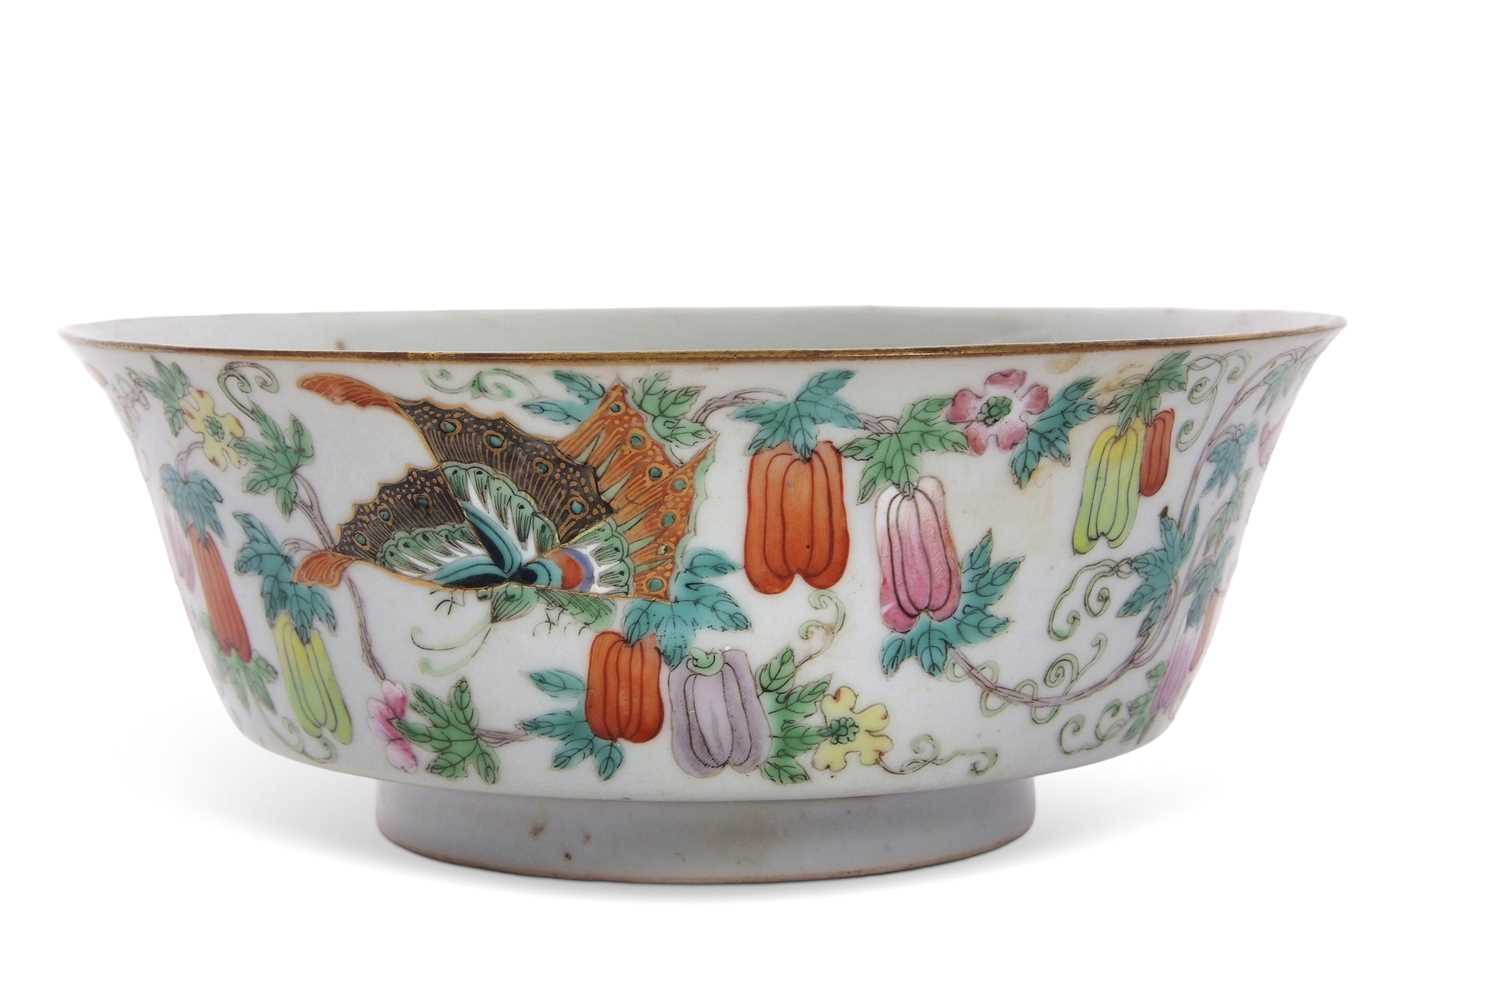 A Qing Dynasty Chinese porcelain bowl 19th century Jiaqing and probably period with flared rim, with